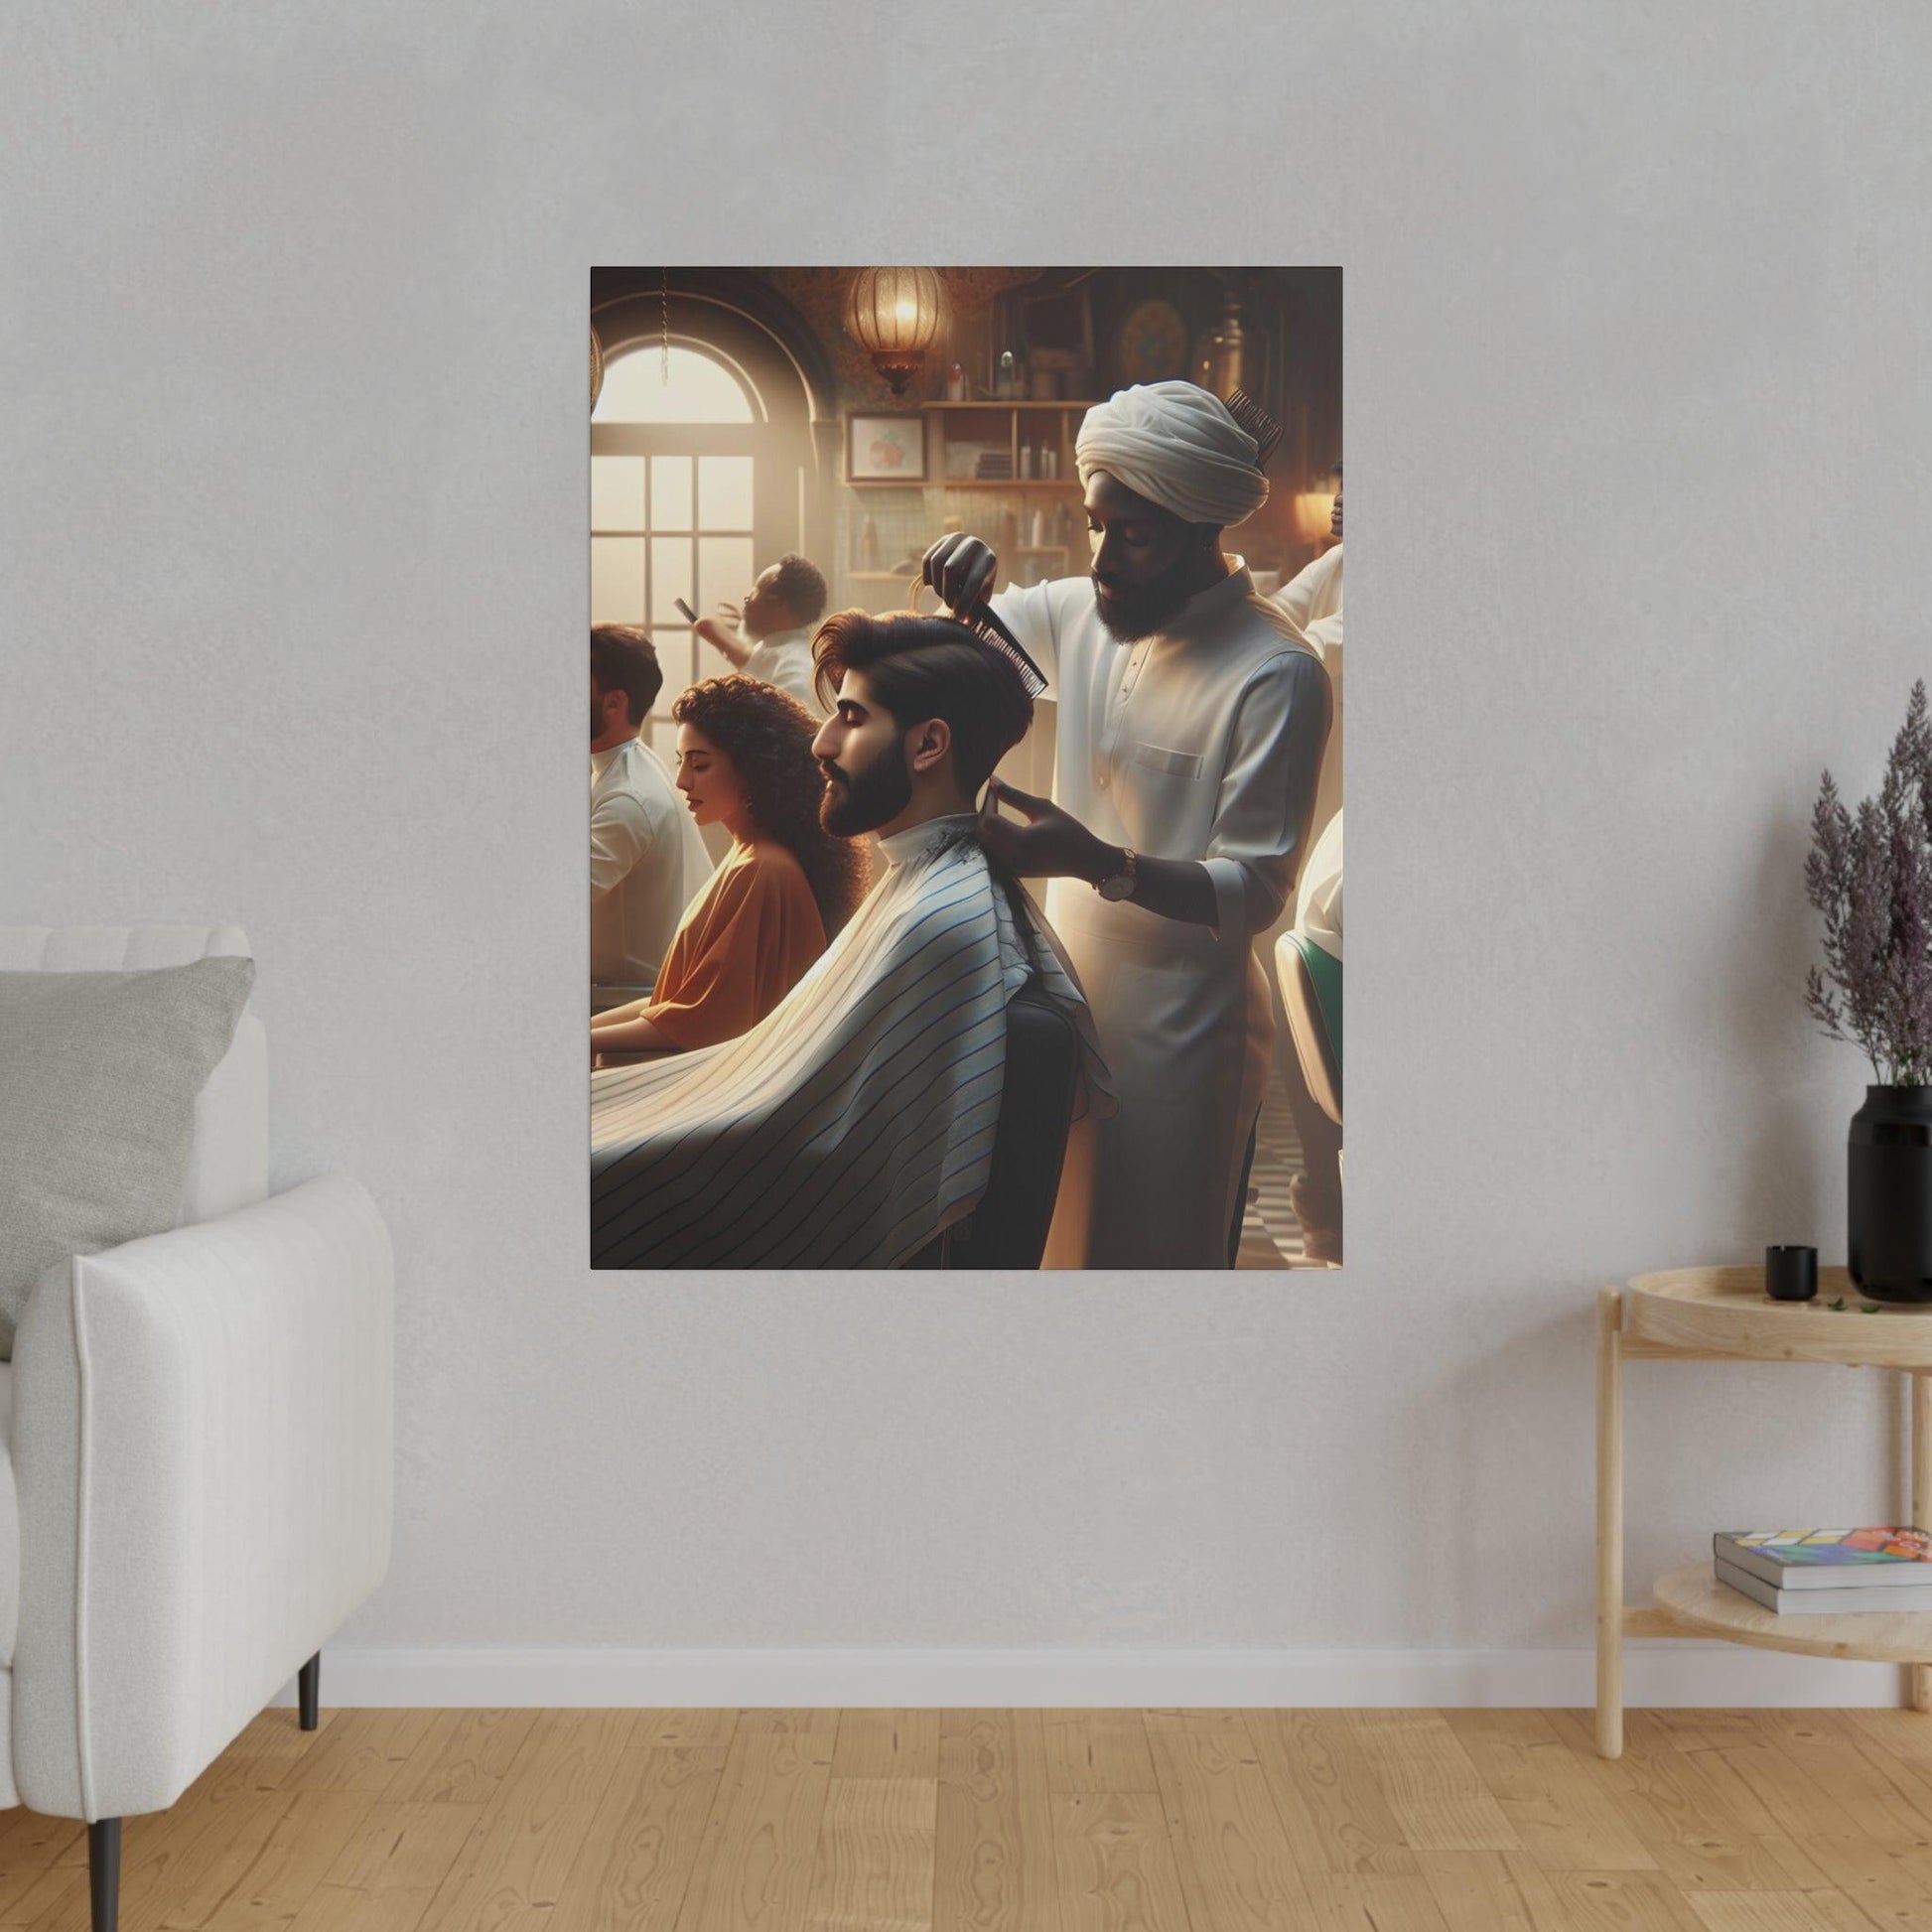 "Barber Shop Chronicles: Vintage Canvas Wall Art" - The Alice Gallery